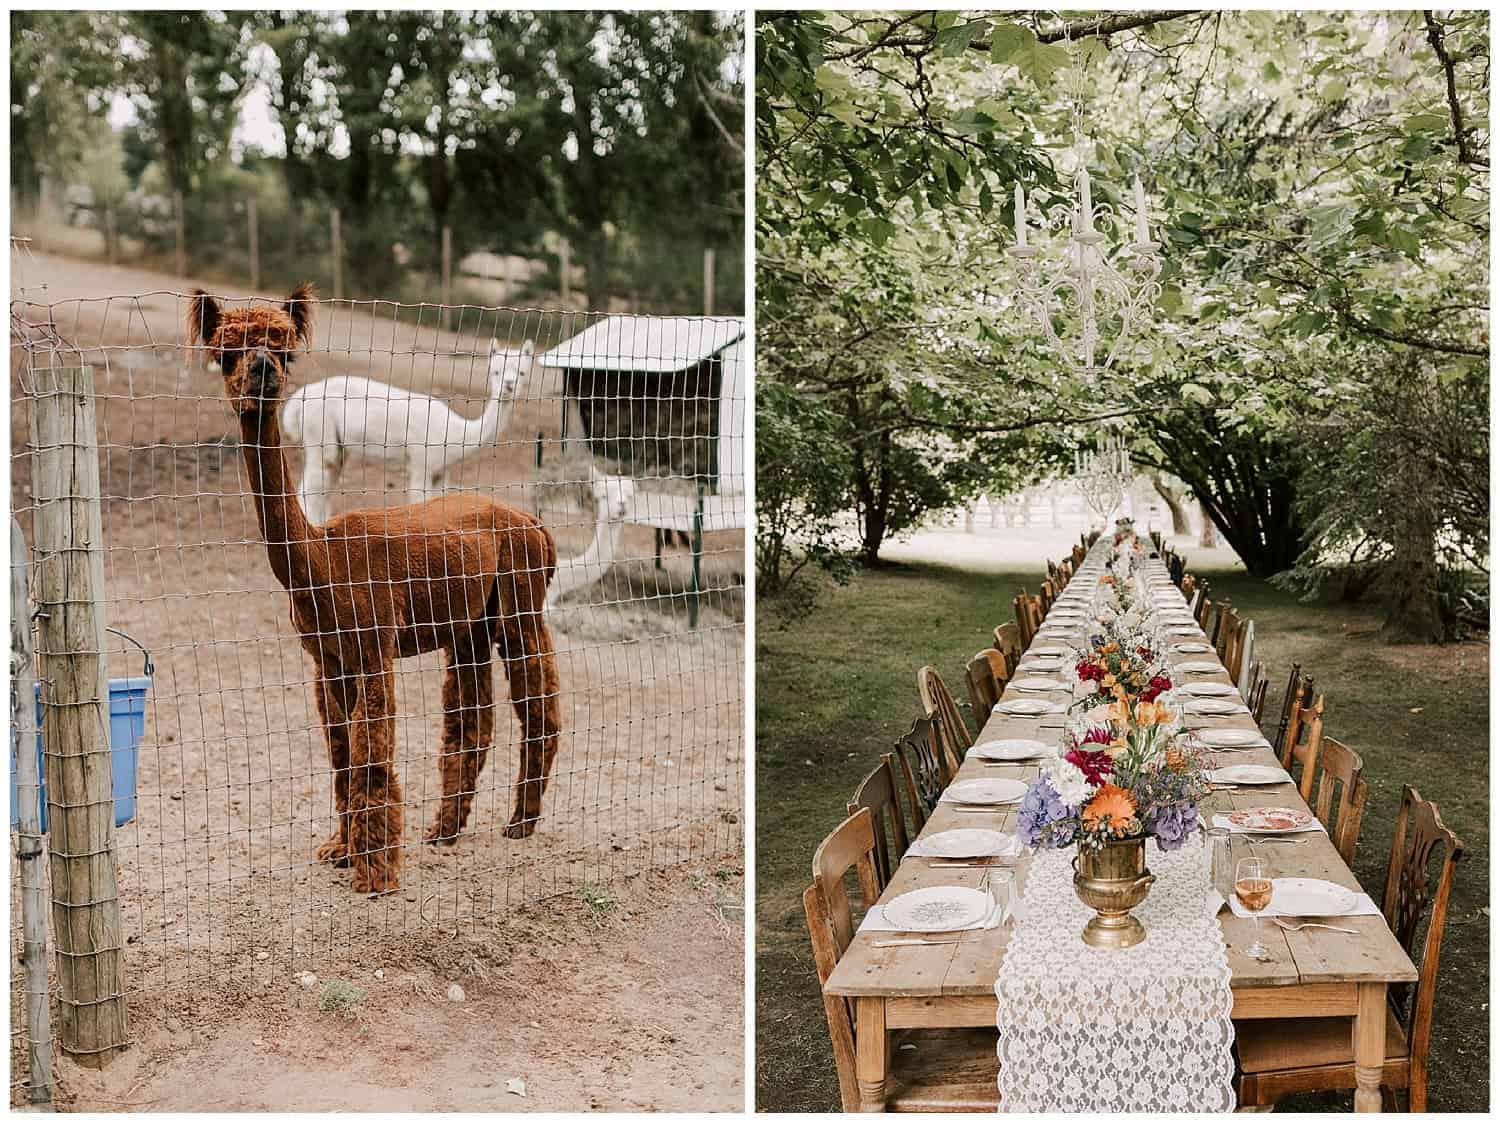 Alpaca and Farm Tables at the Wayfarer on Whidbey Island